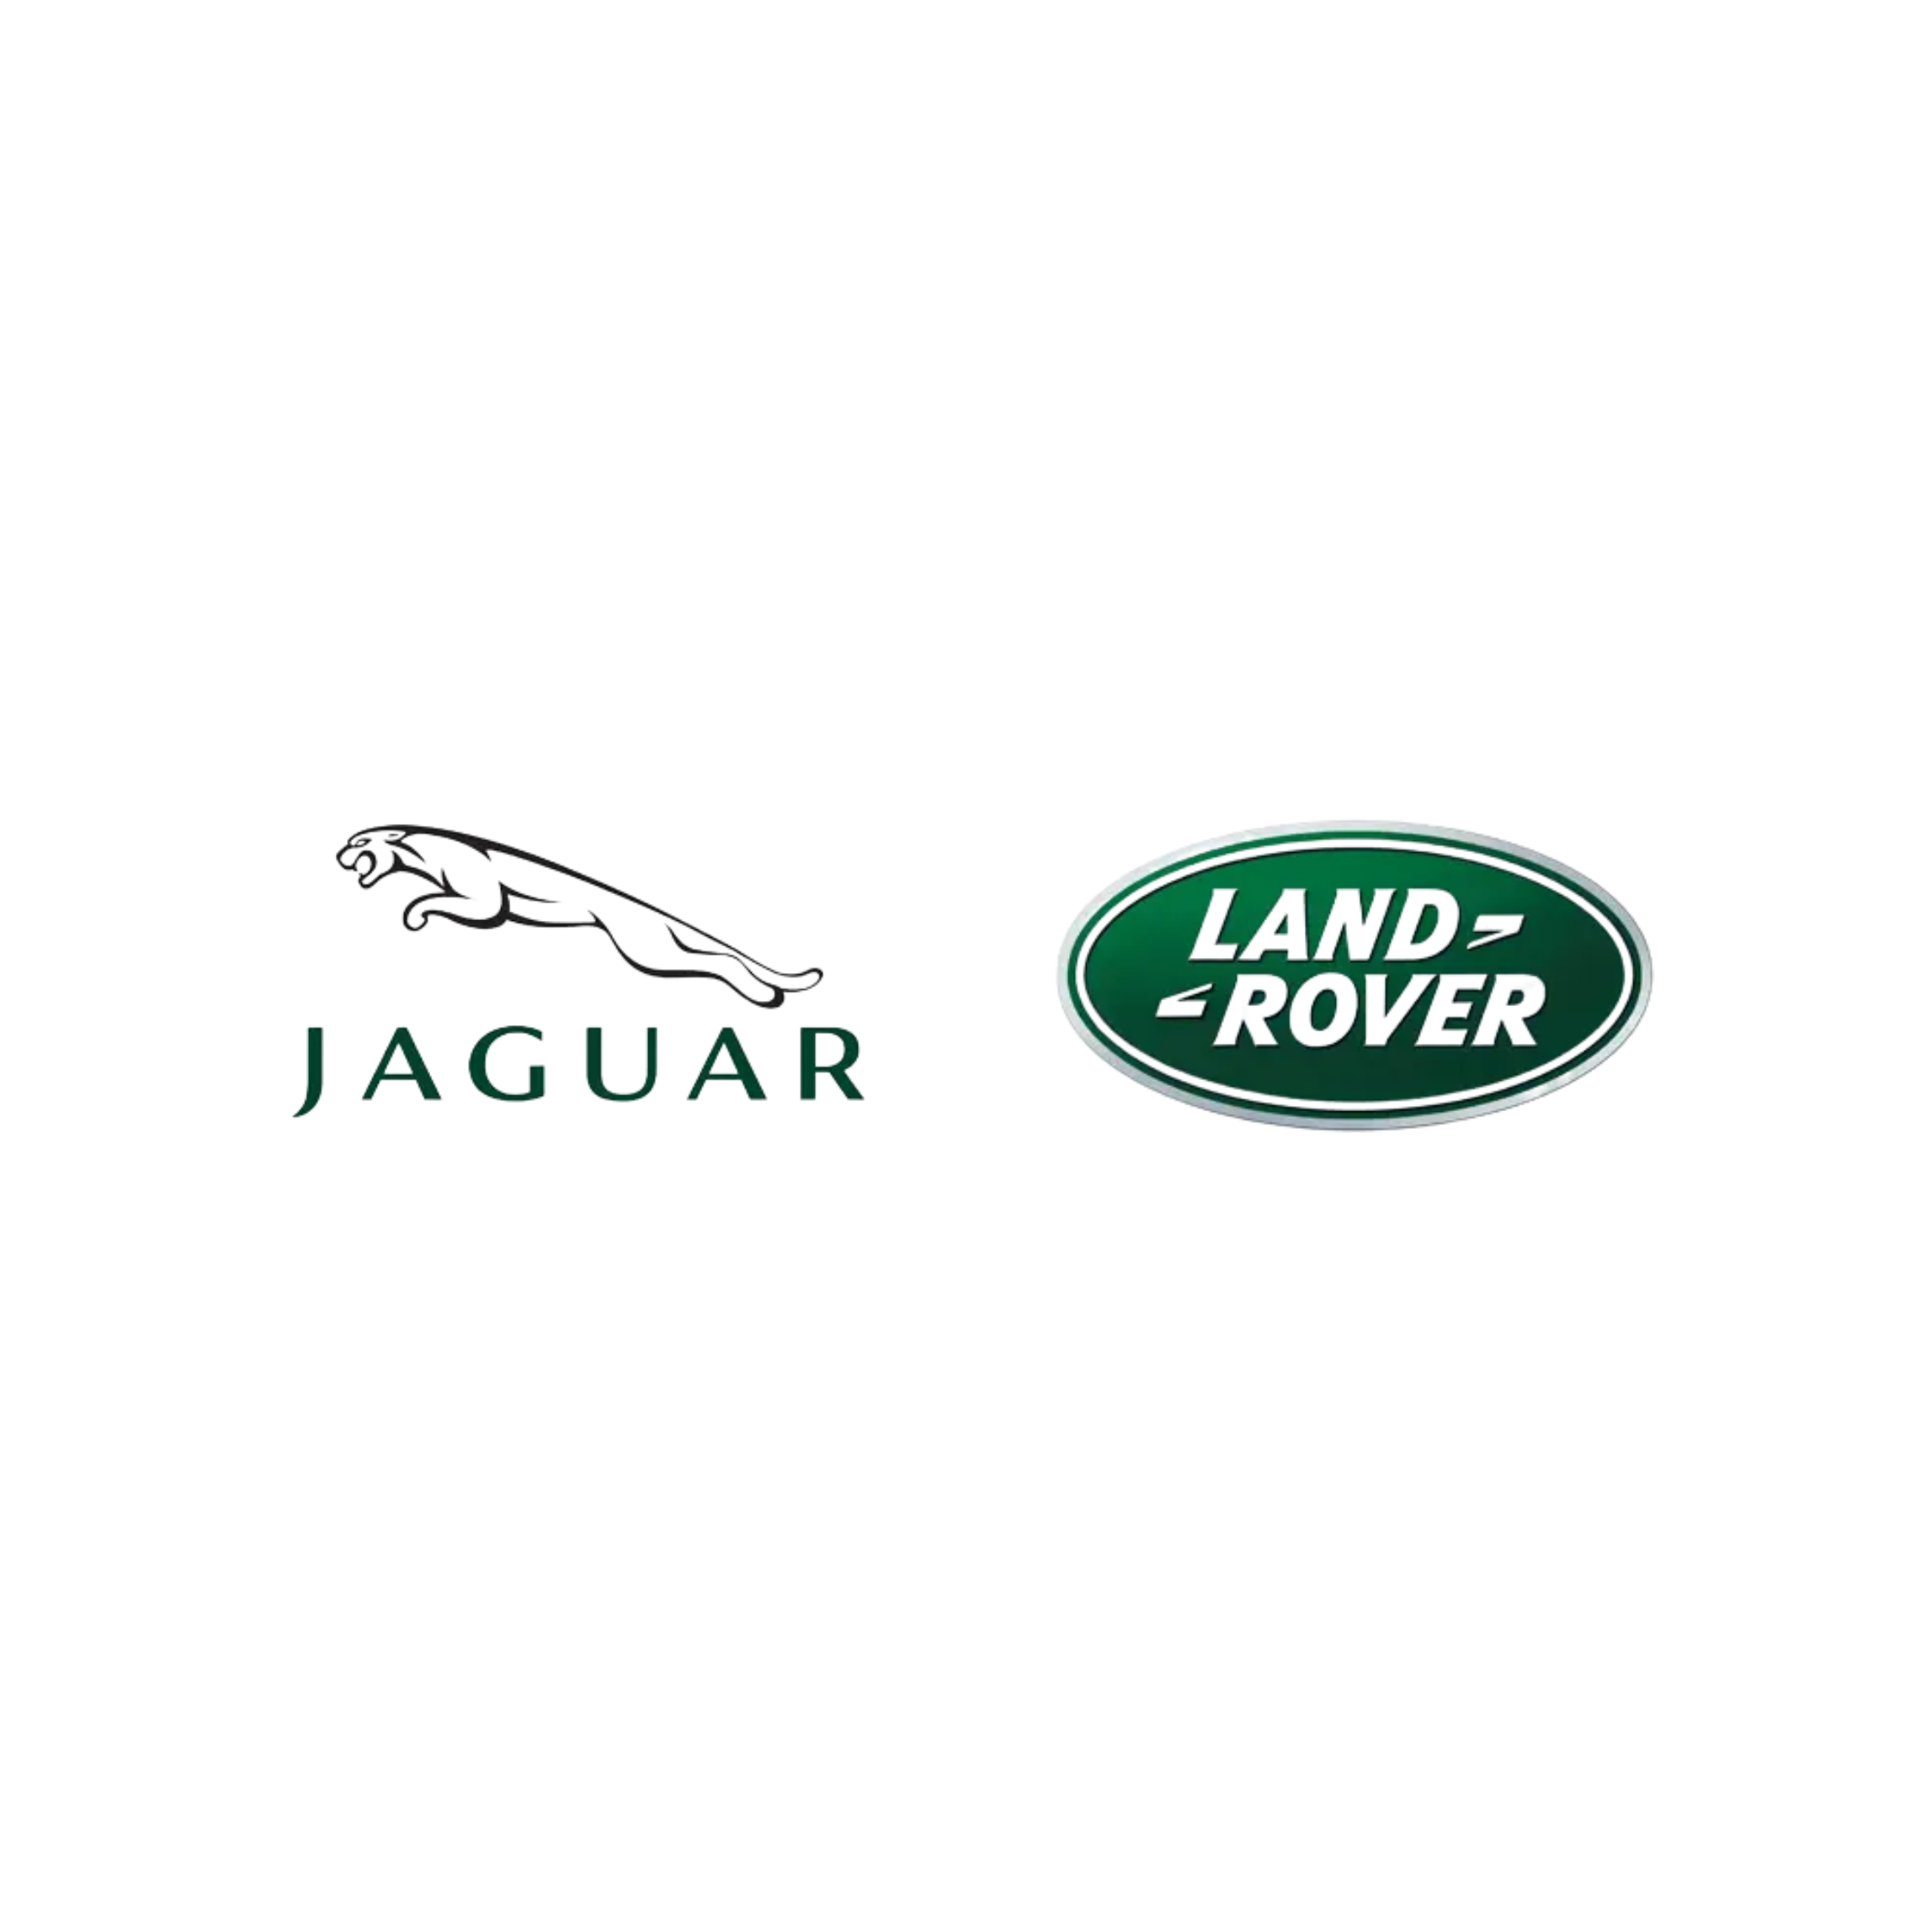 Tessier-employment-icons-JaguaryLandRover.png